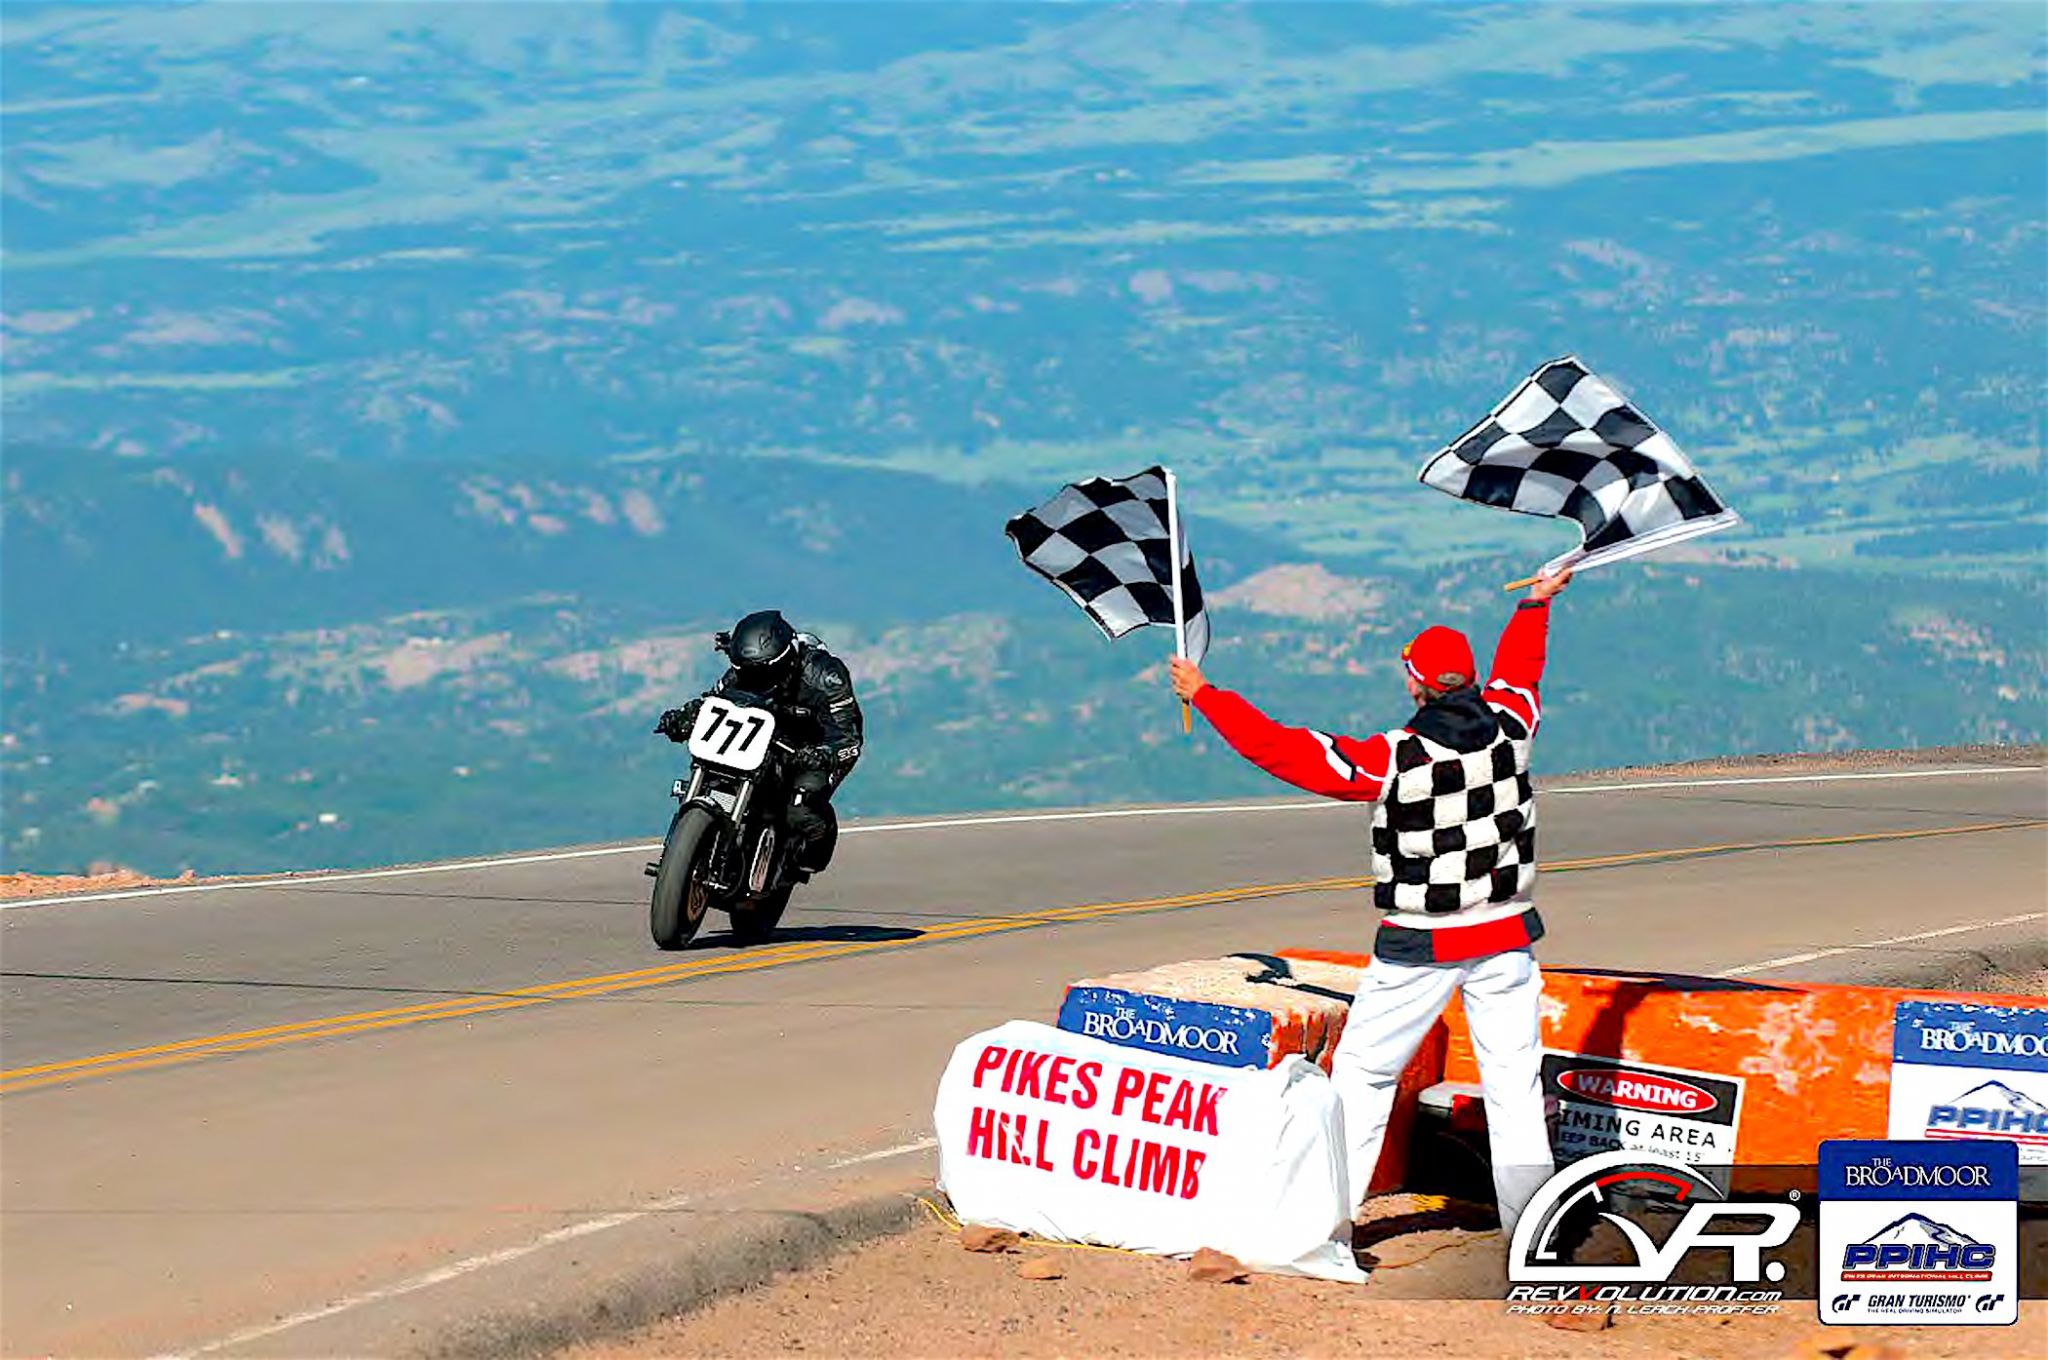 Electric Motorcycles to Race Pikes Peak at the 100th Anniversary of the